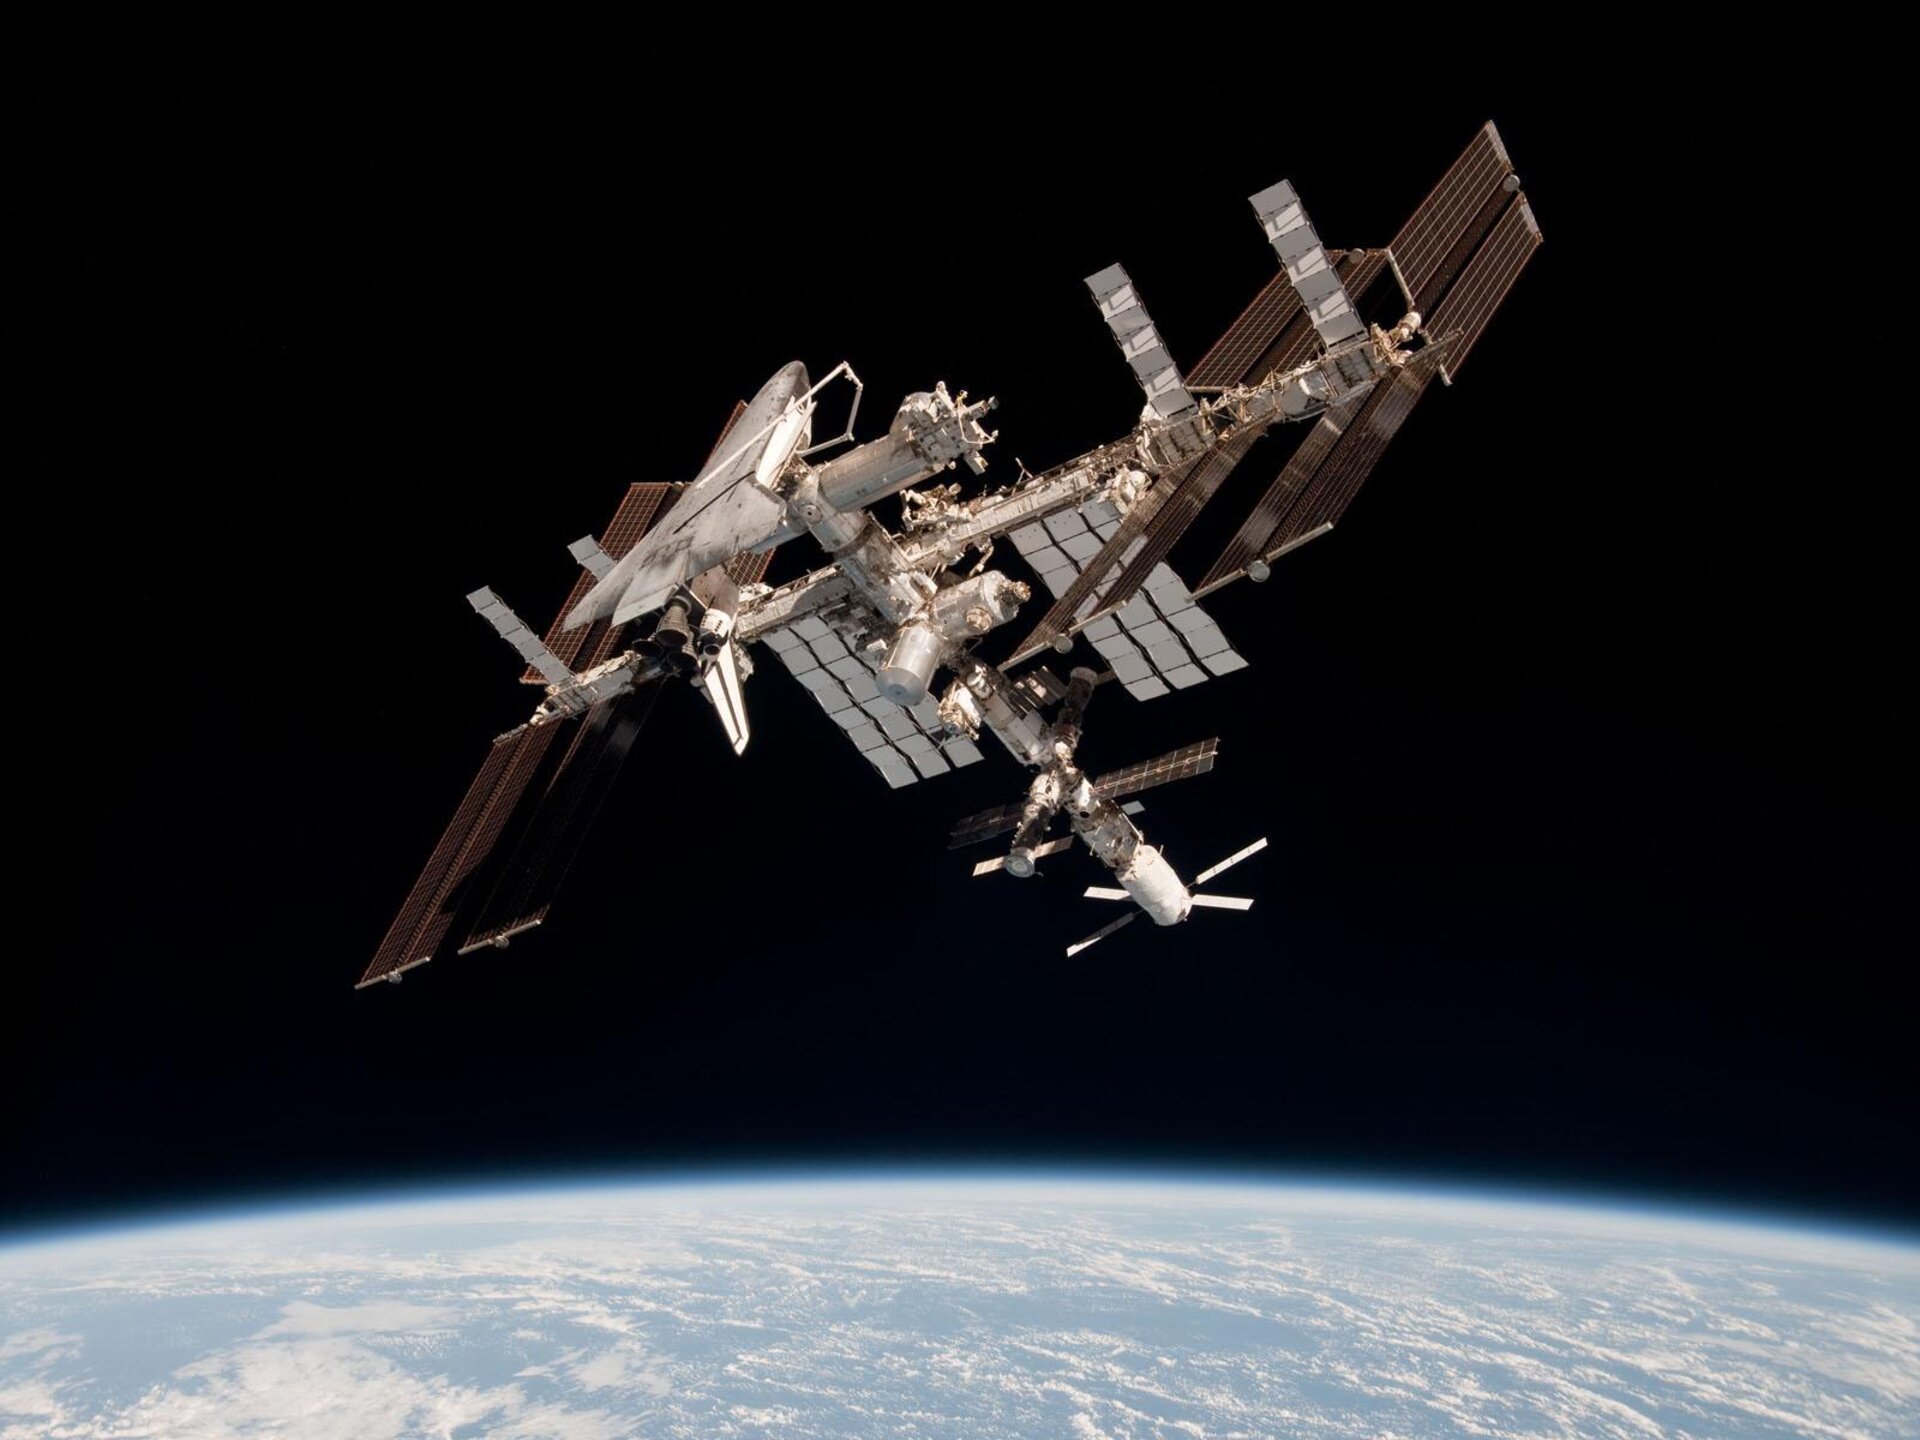 The International Space Station with ATV-2 and <i>Endeavour</i>